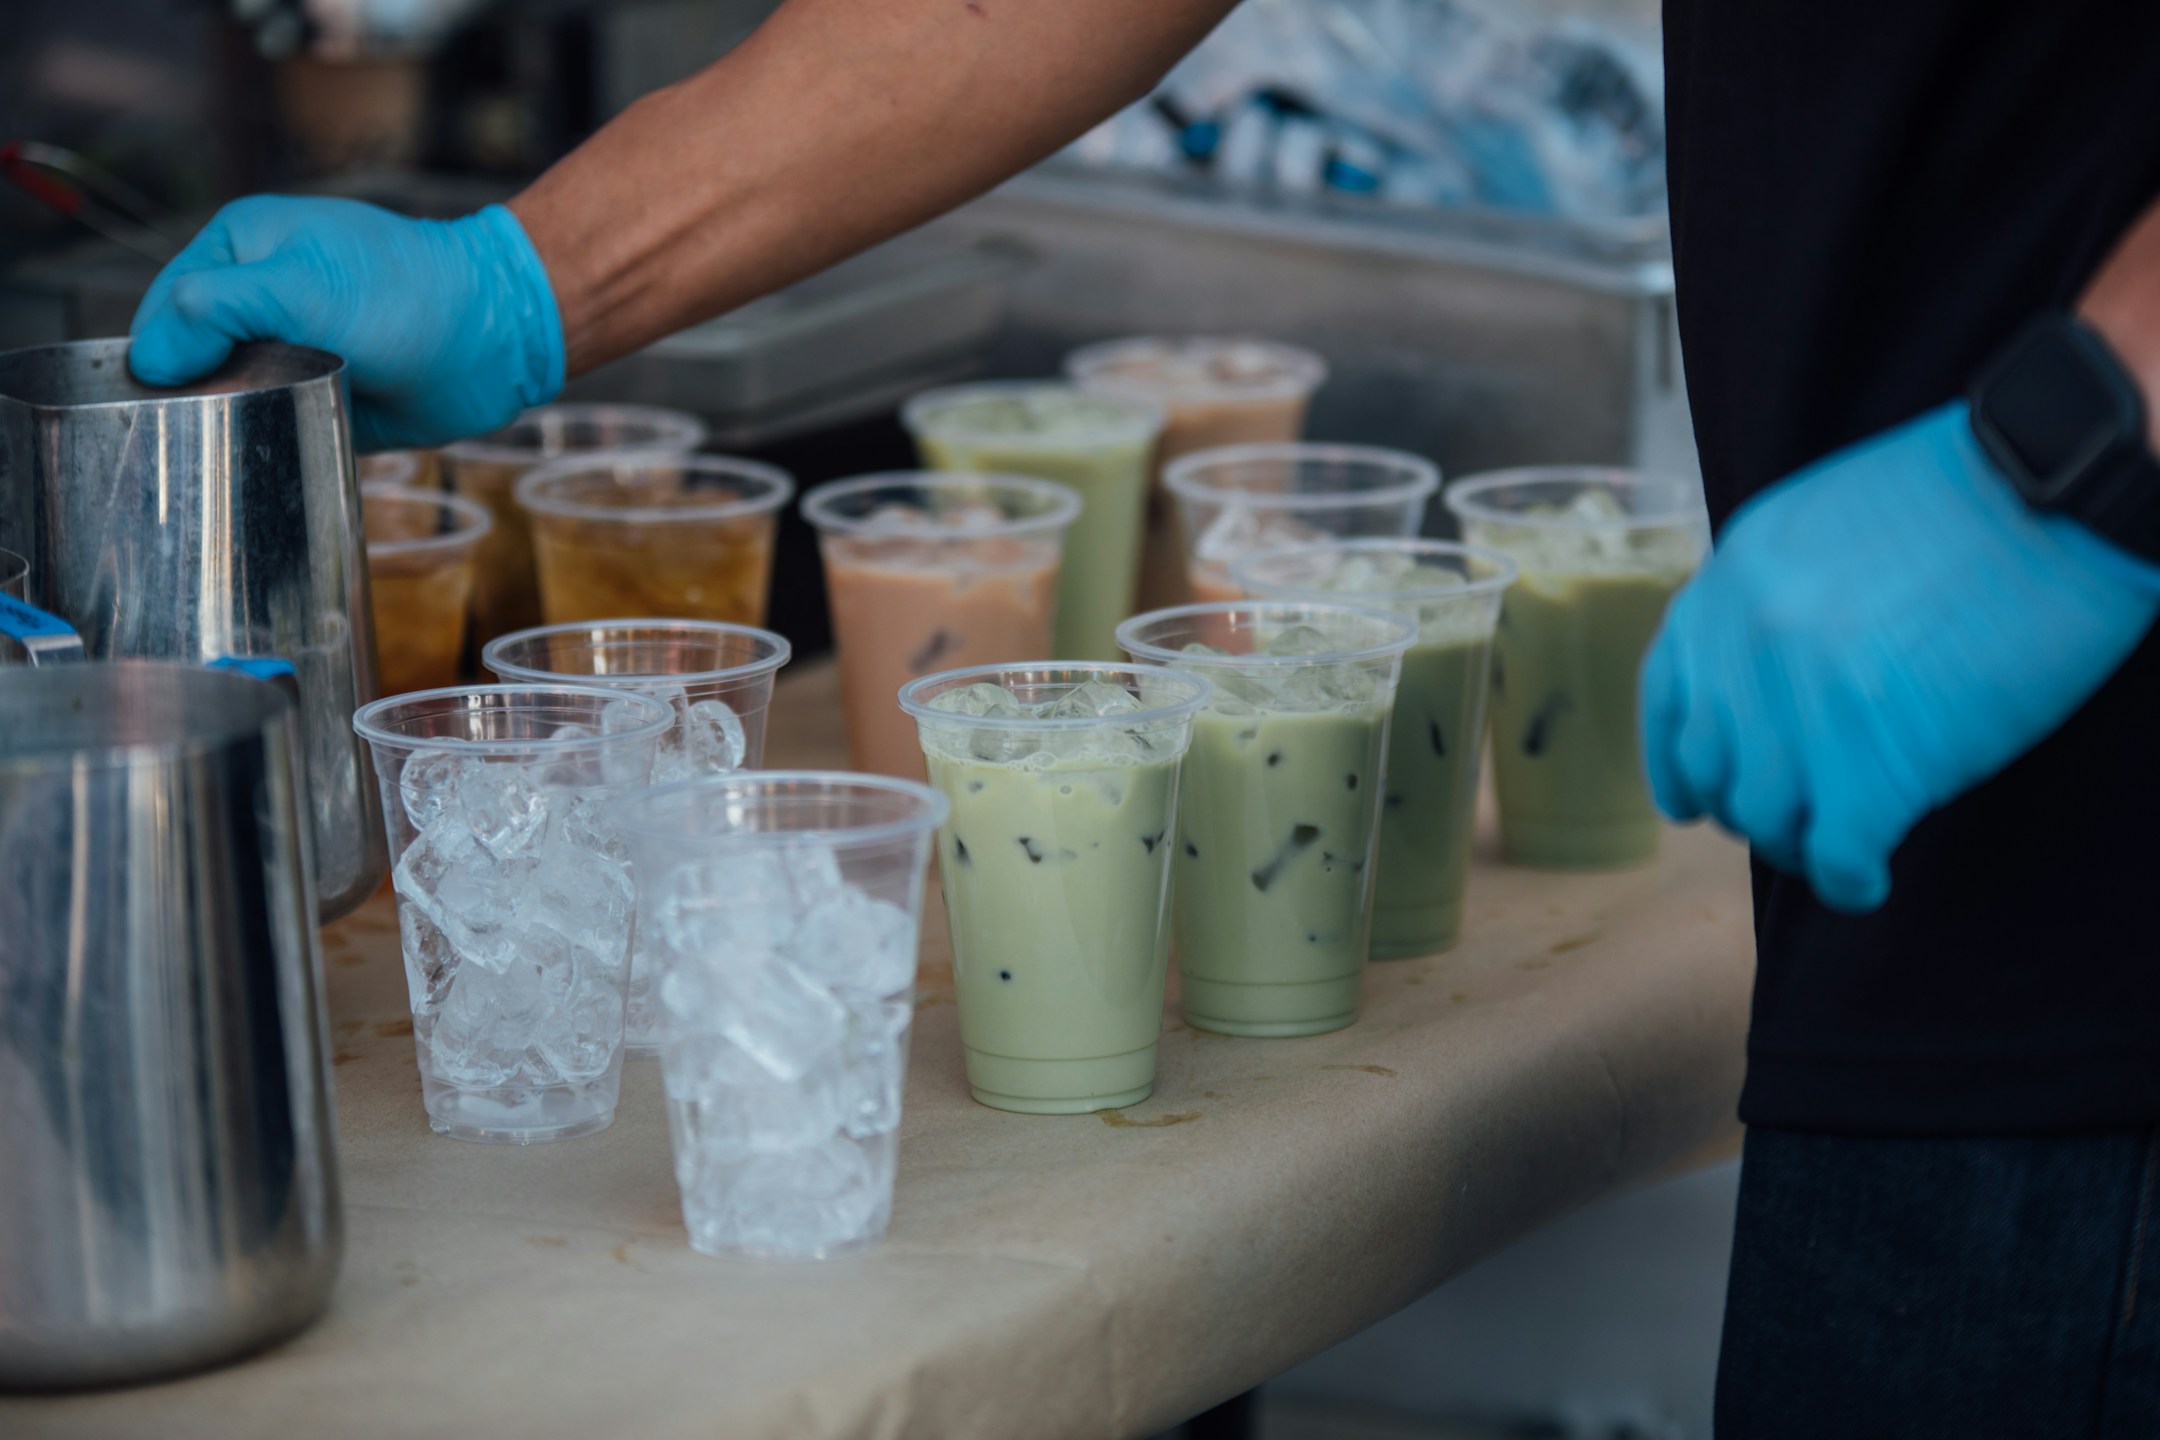 Google Doodle celebrates bubble tea. Here's where you can get it in Indy